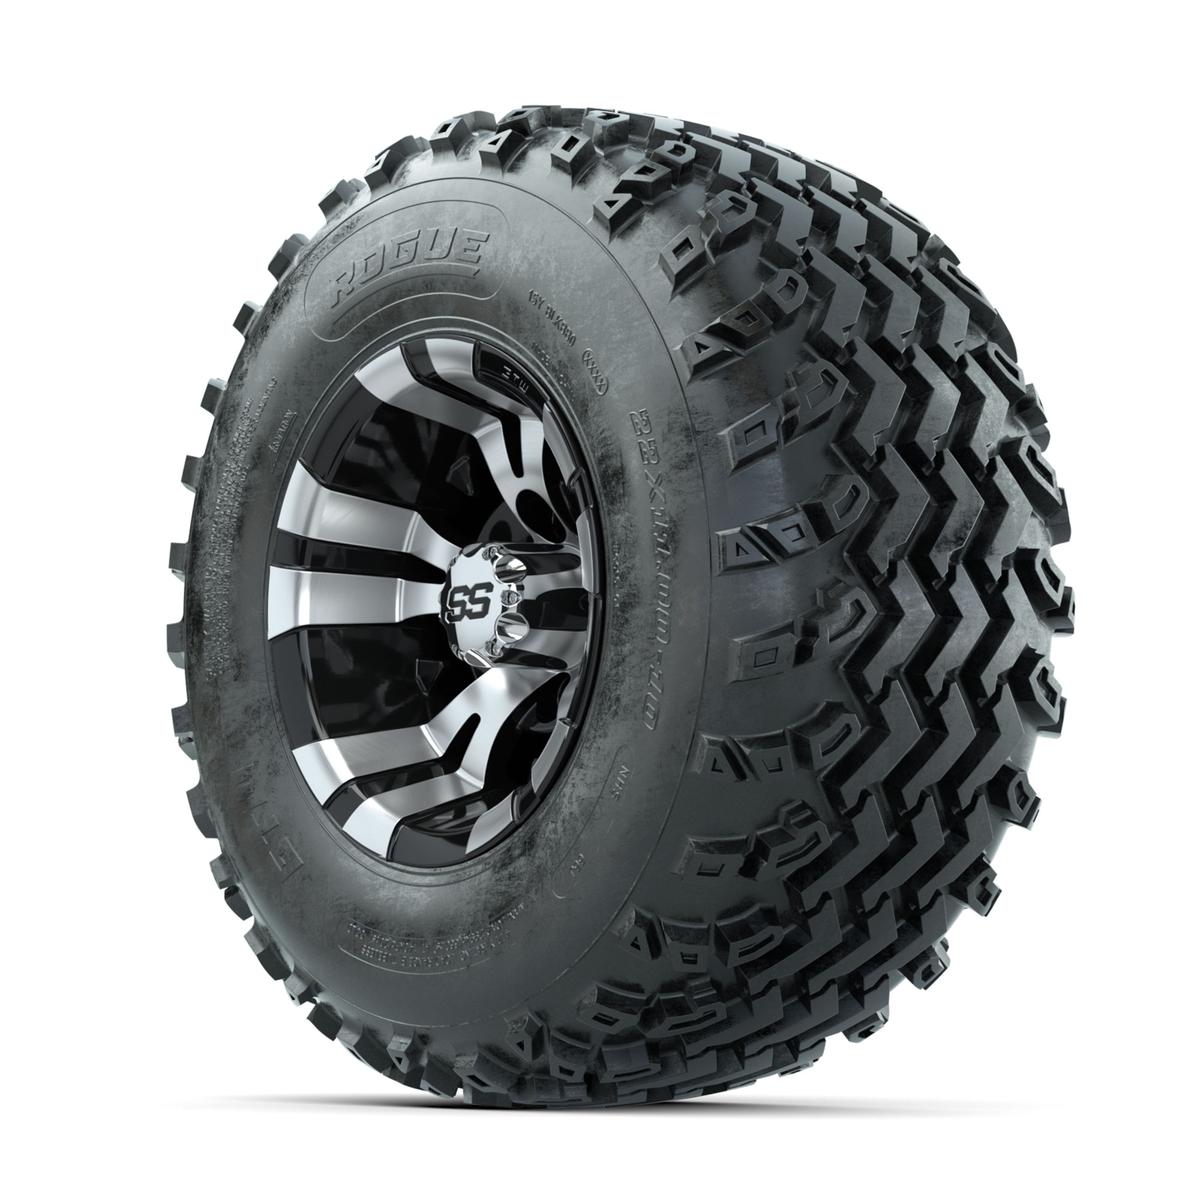 GTW Vampire Machined/Black 10 in Wheels with 22x11.00-10 Rogue All Terrain Tires – Full Set